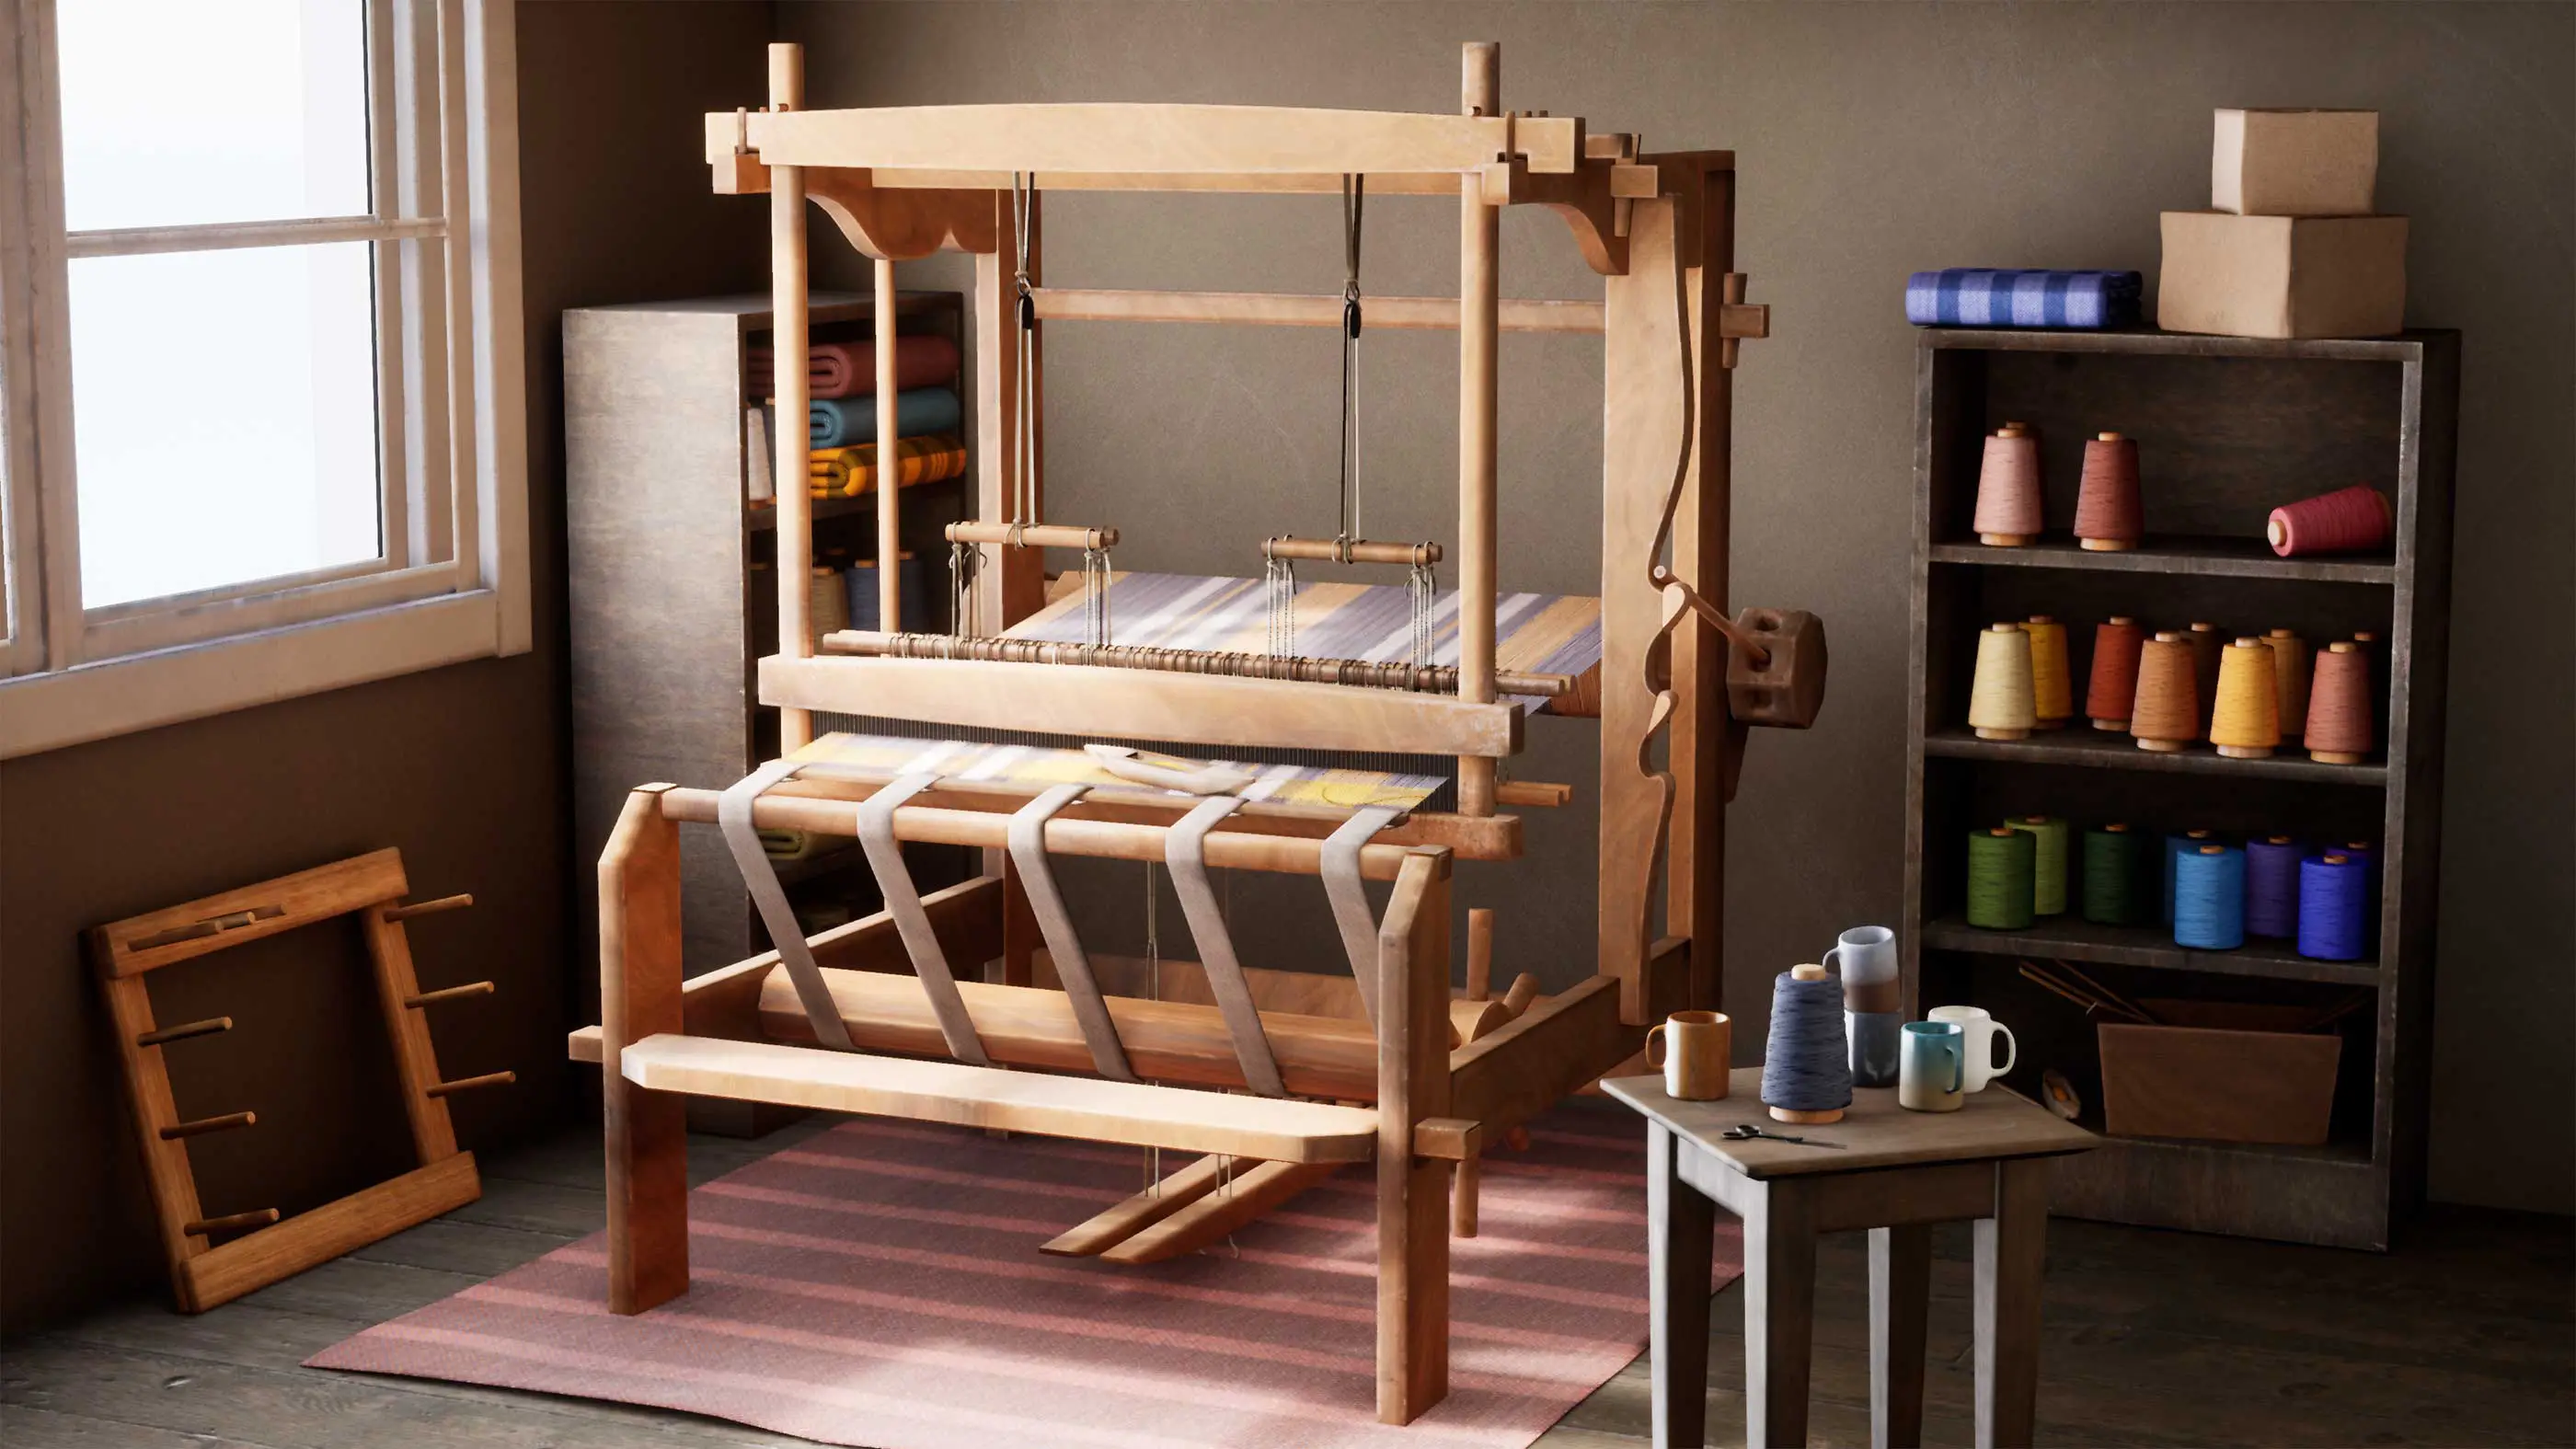 3D model of a loom along with various different colors of thread.